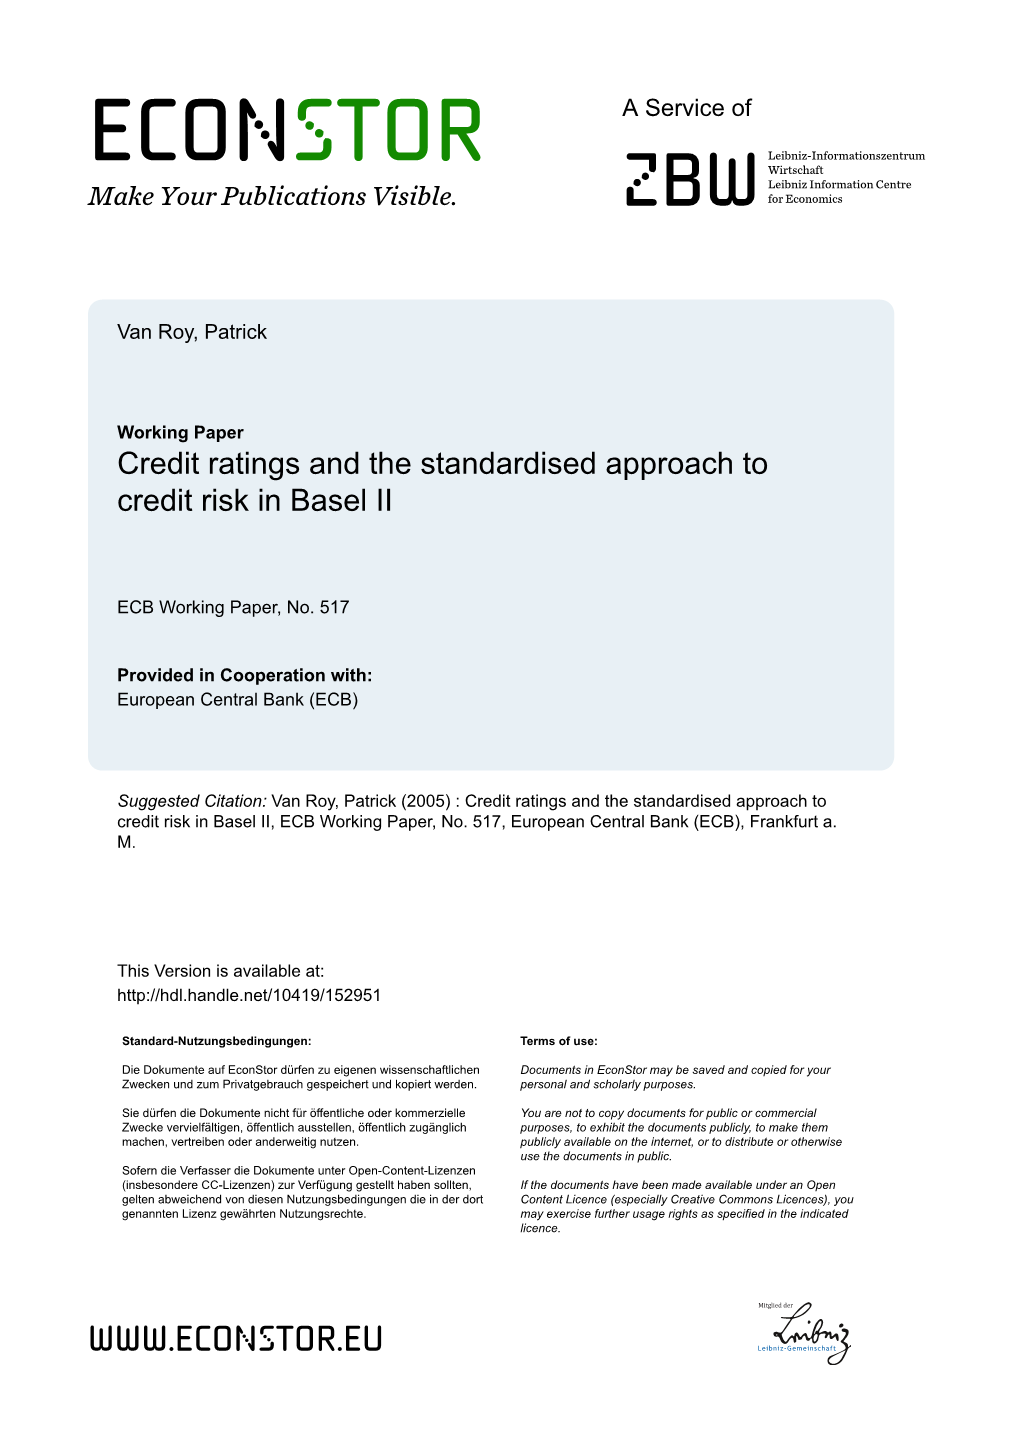 Credit Ratings and the Standardised Approach to Credit Risk in Basel II